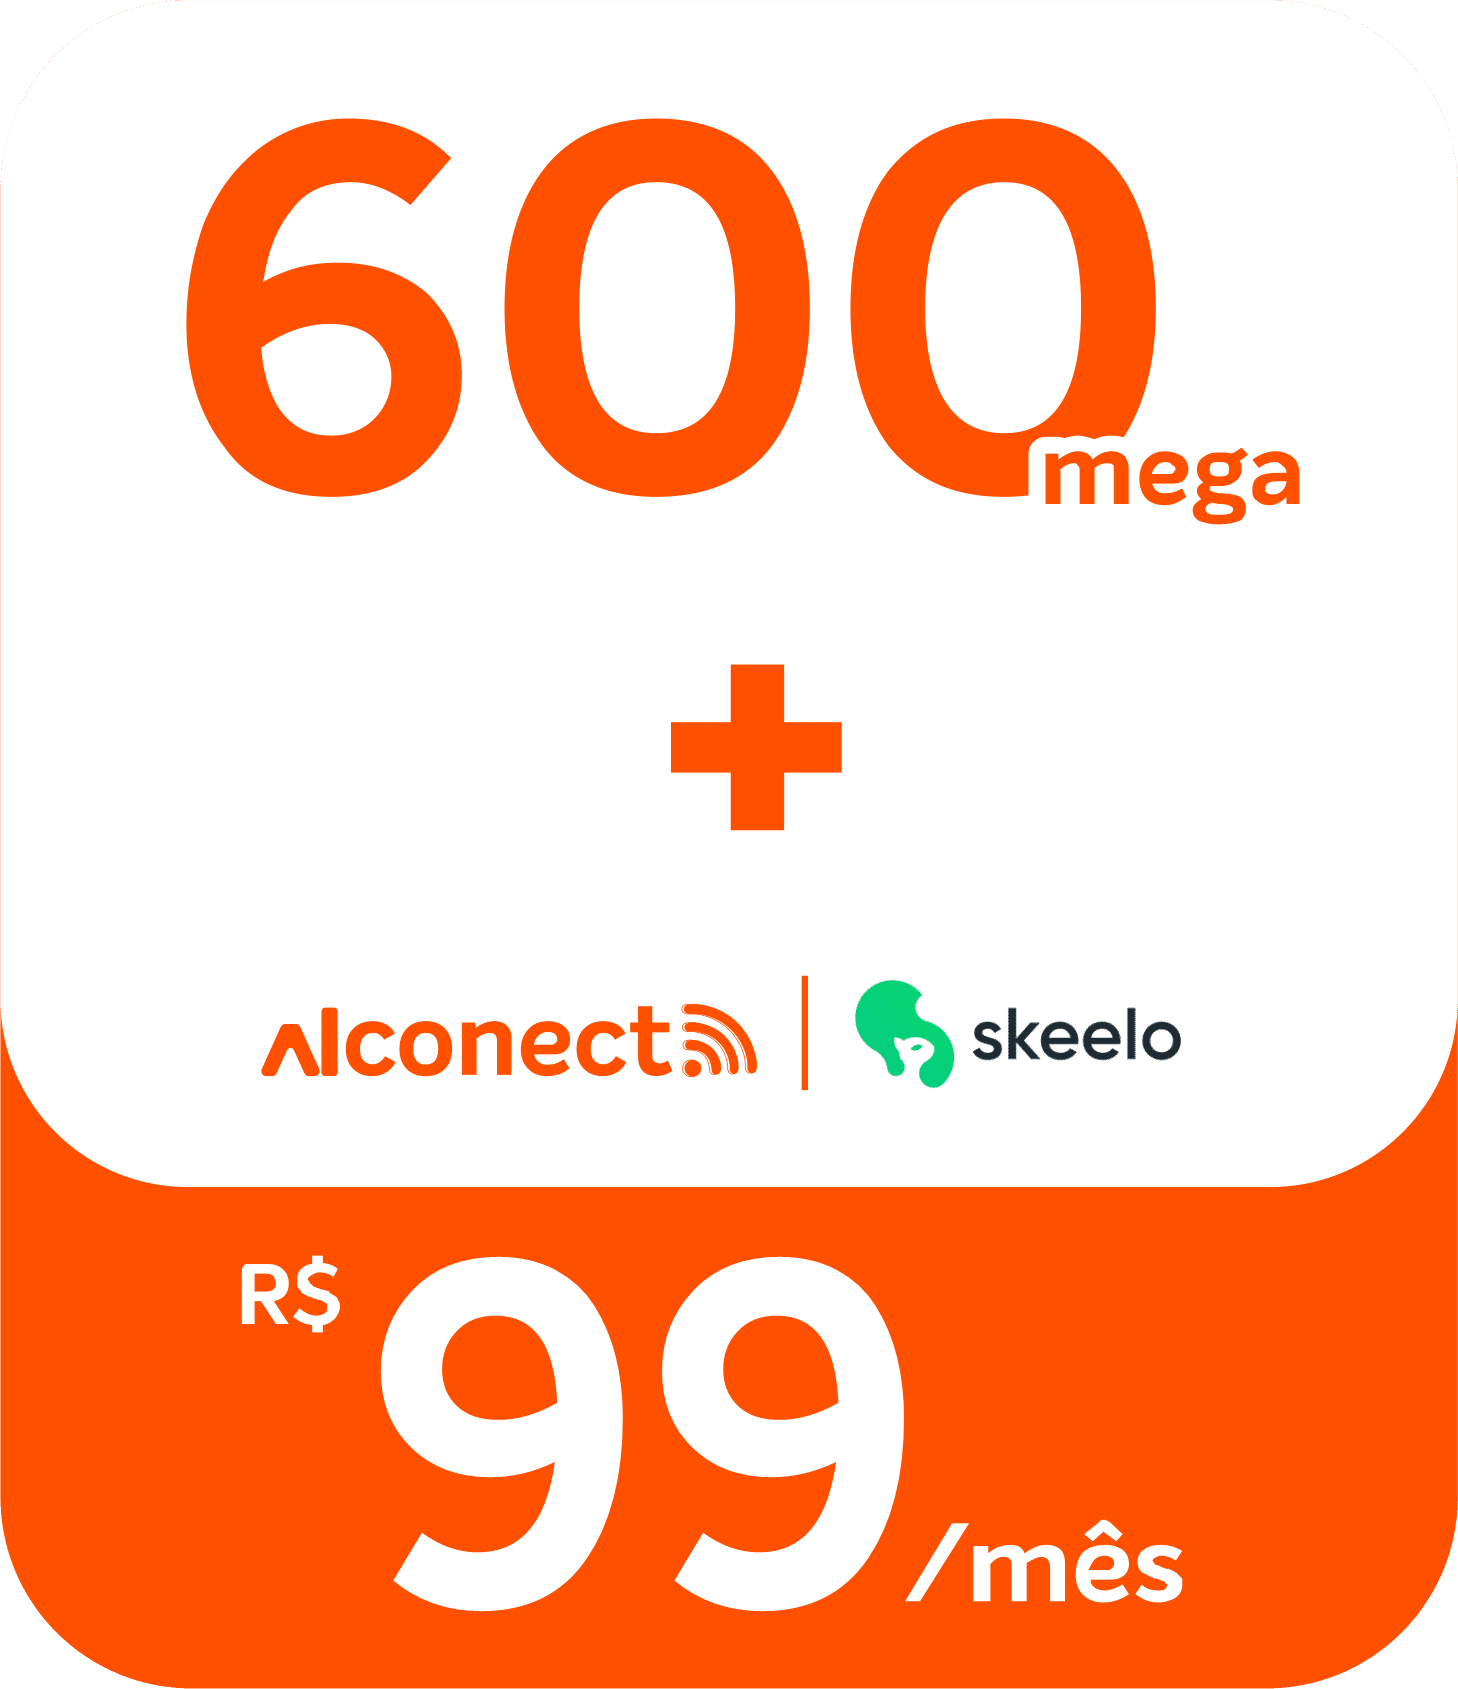 ALCONECT 600 MB R$ 99,00